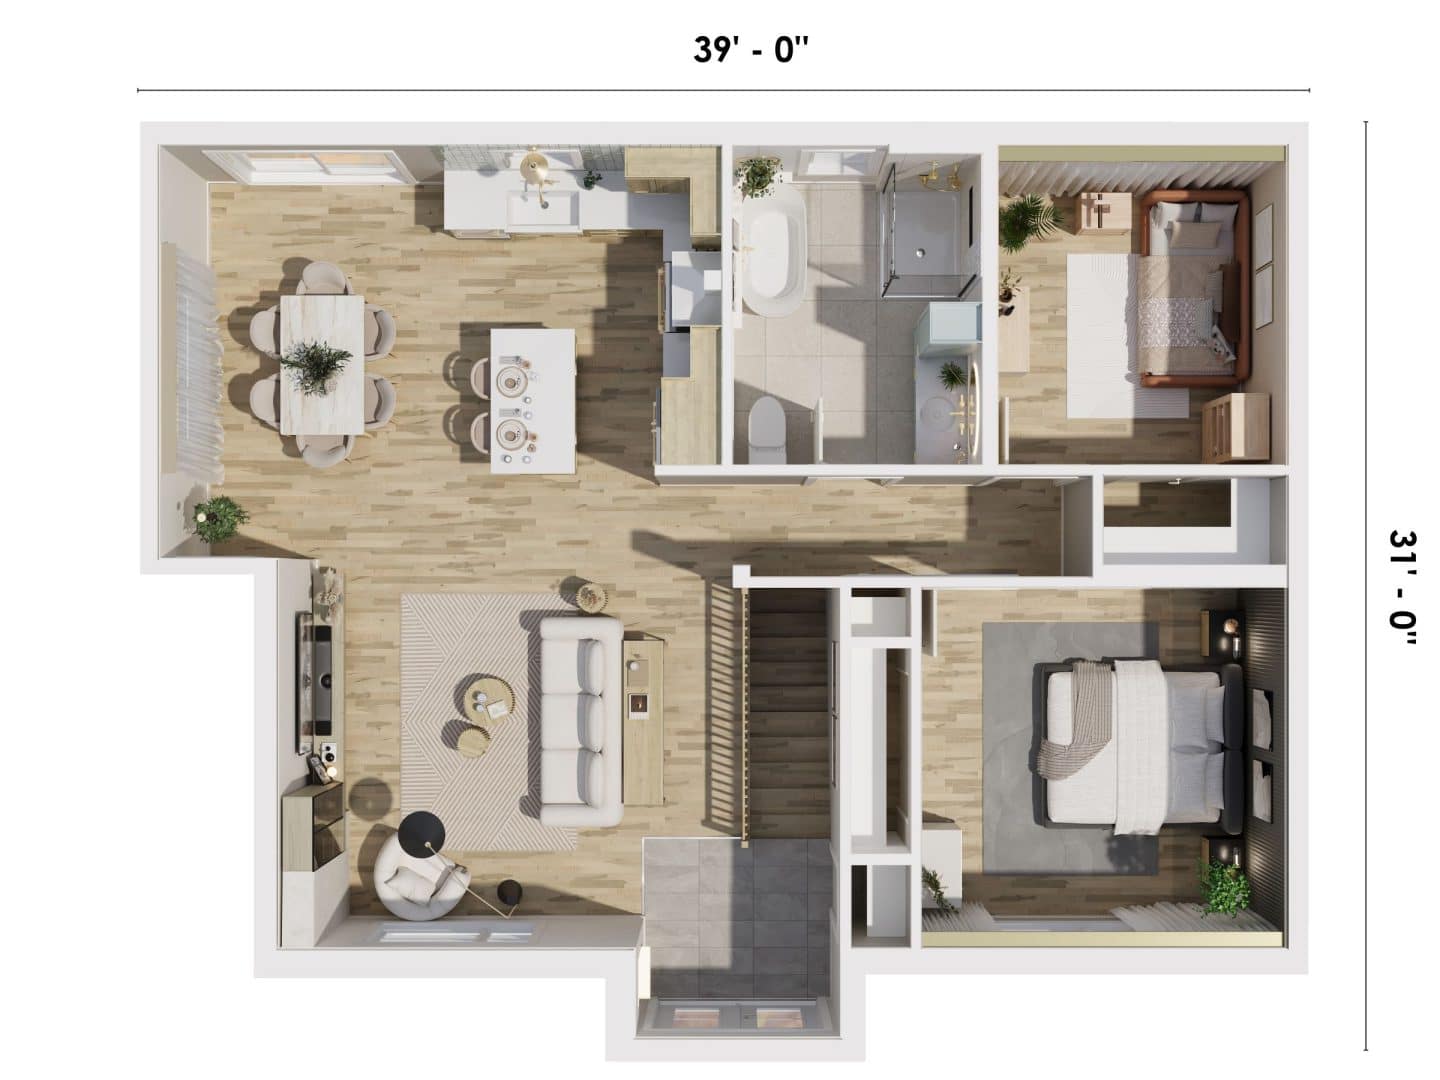 The Cassia model is a single-storey Farmhouse-style home. Plan view from above in 3D